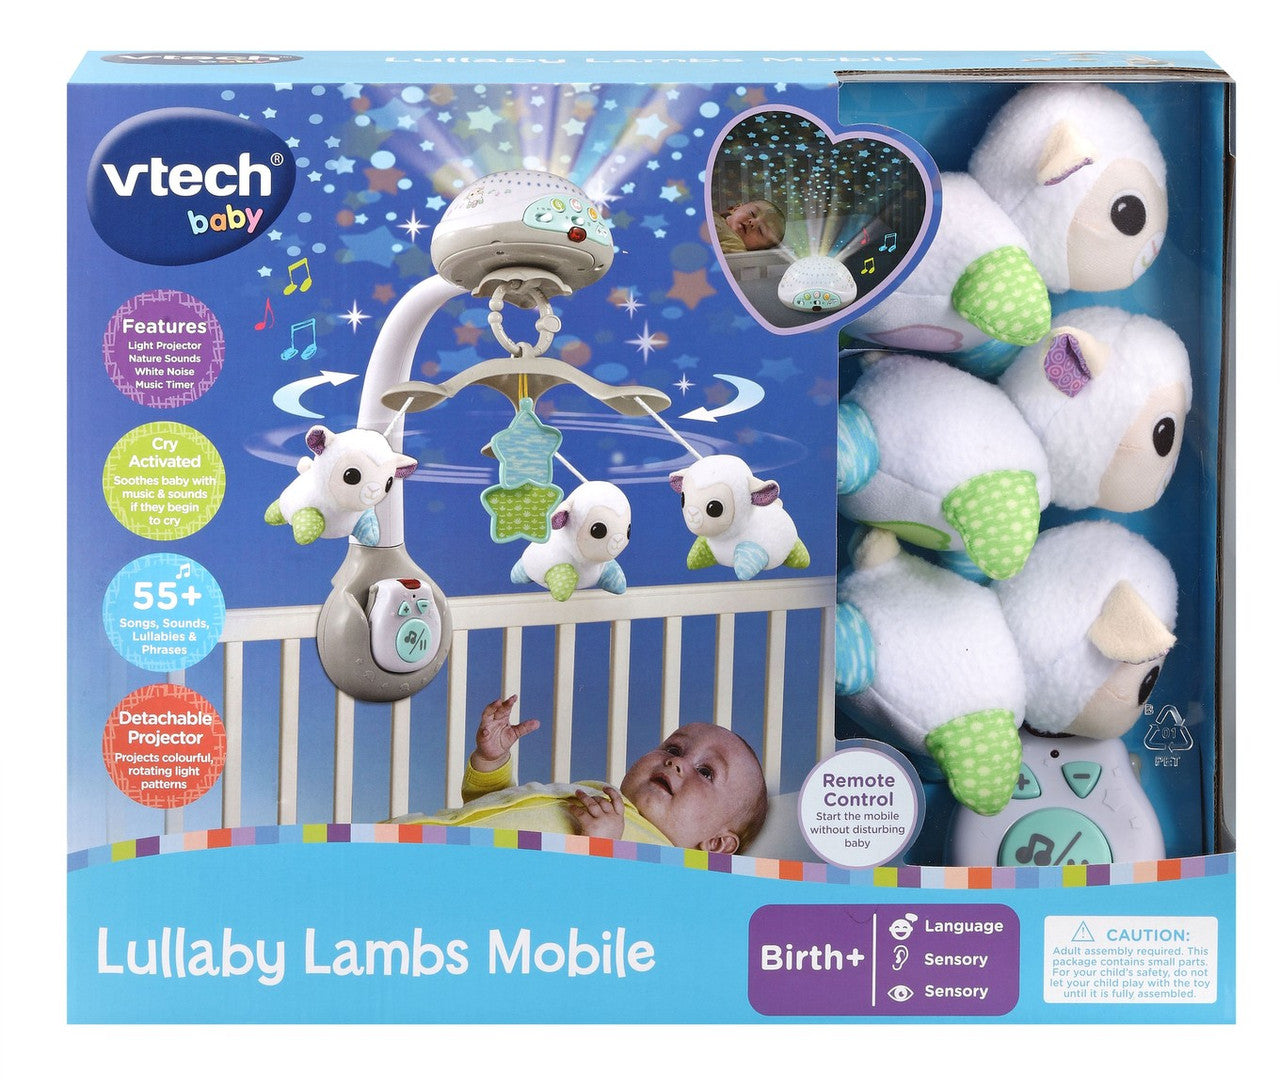 Vtech Lullaby Lambs Mobile requires 3 x AA 2 x AAA batteries